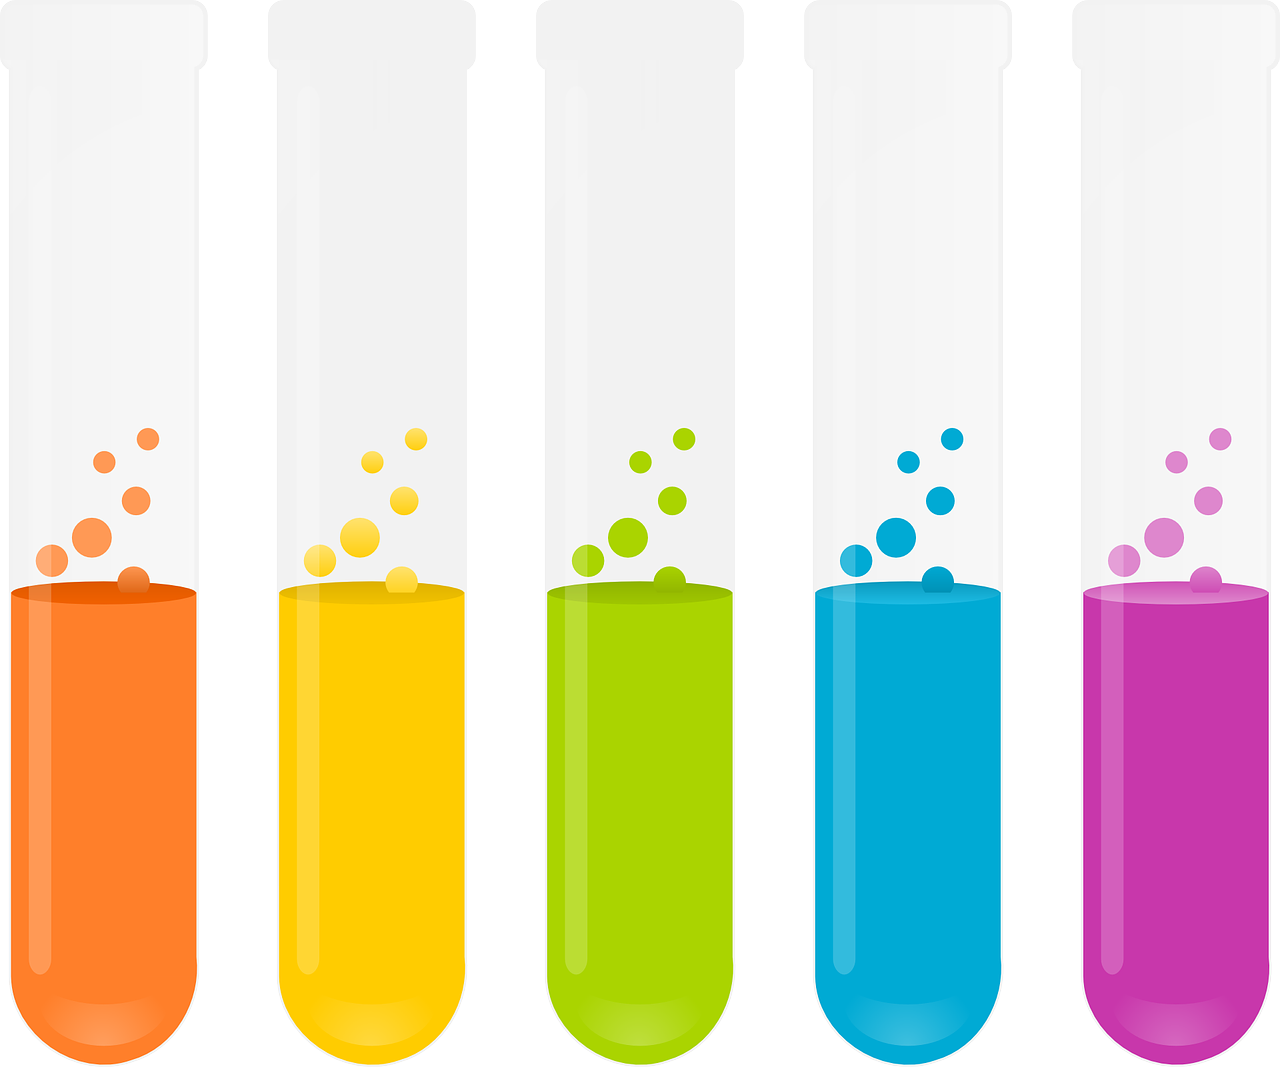 a row of test tubes filled with different colored liquids, an illustration of, exciting illustration, rainbow colored, flat bold color, illustration]